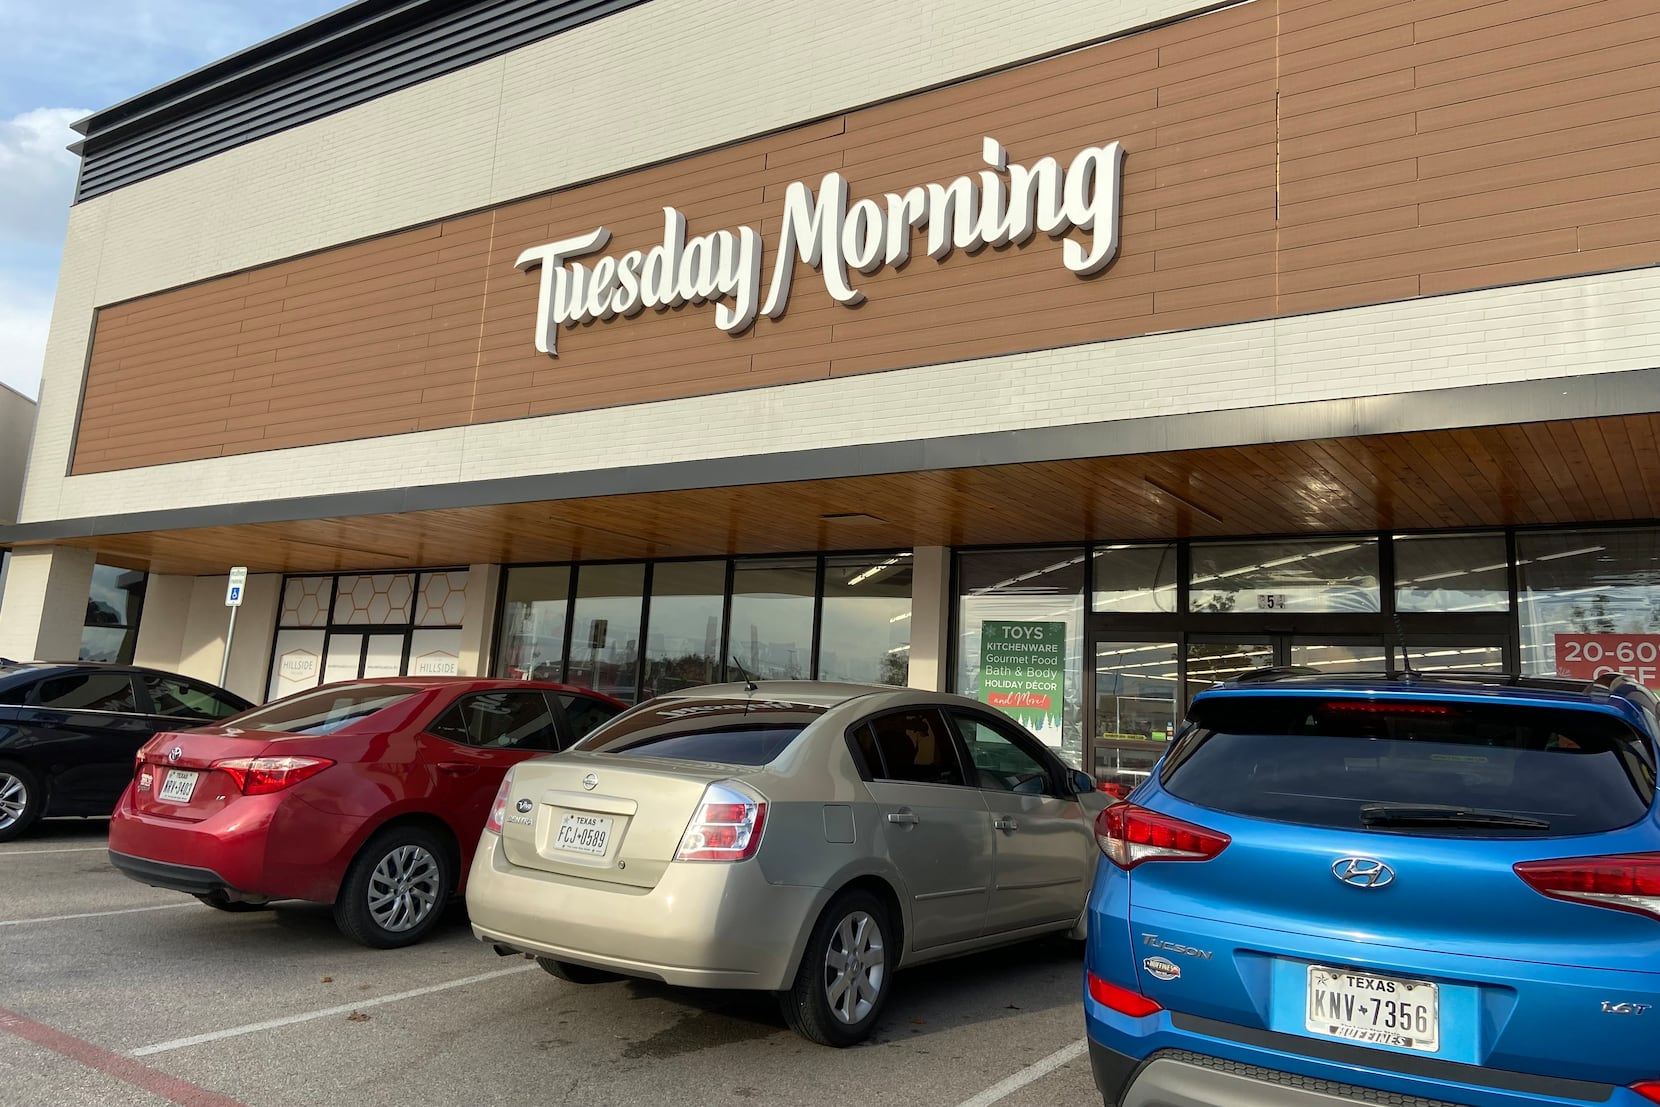 Texas-based Tuesday Morning going out of business, holding liquidation sales